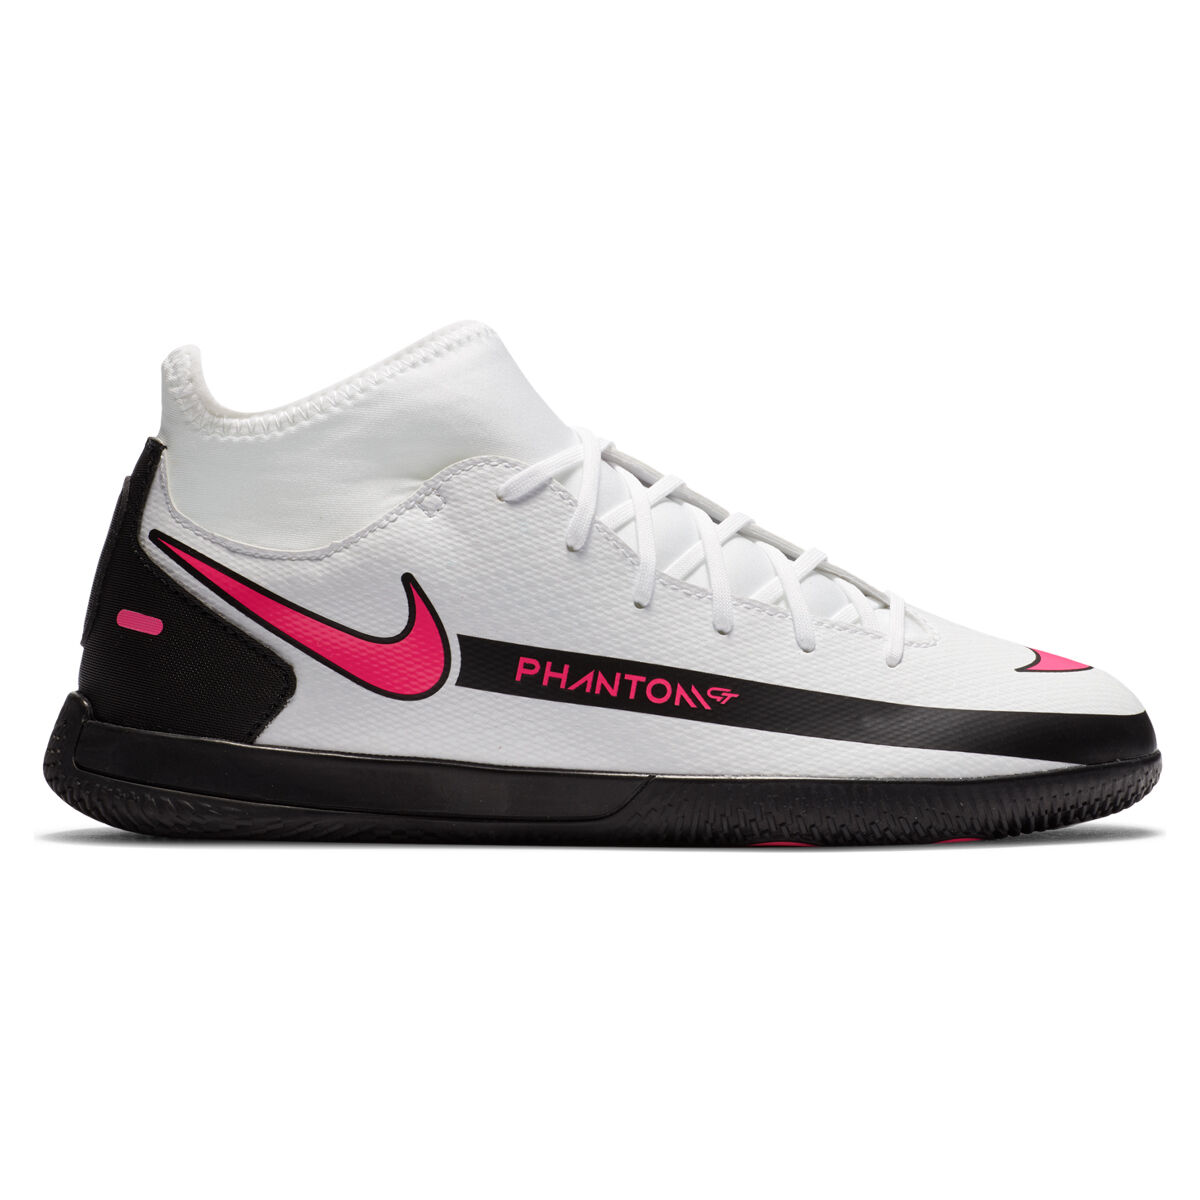 white nike indoor soccer shoes